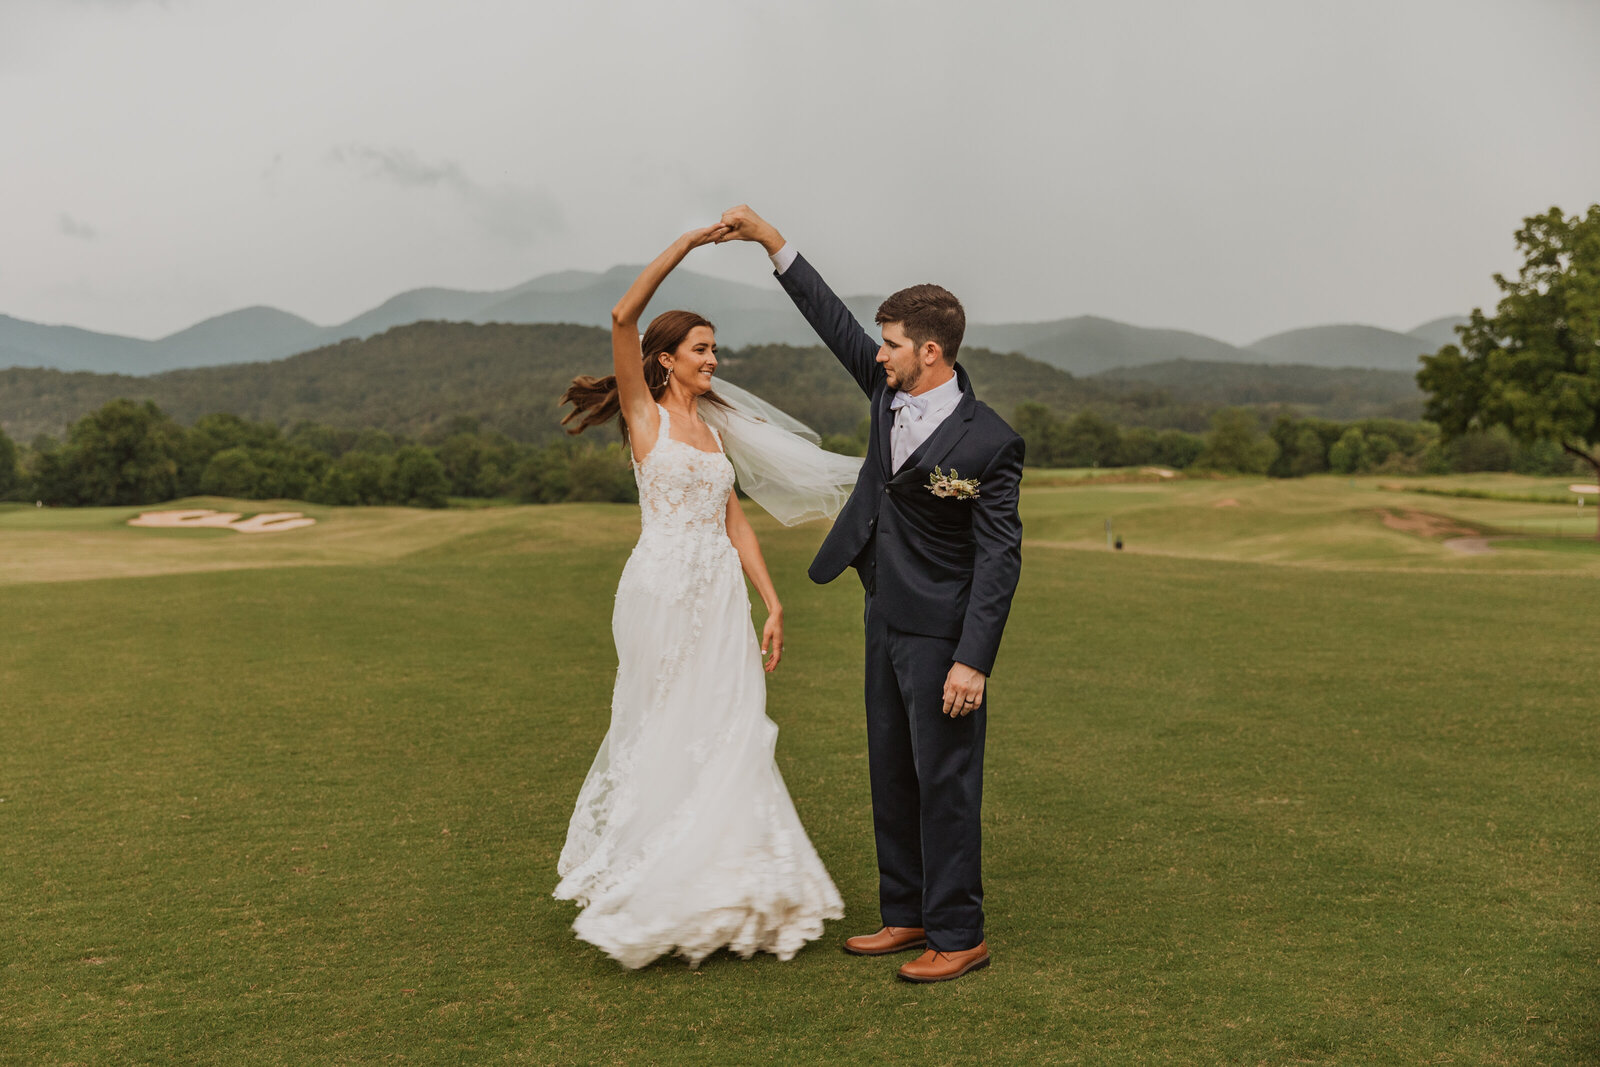 Atlanta-based wedding photographer focused on candid laughter and genuine connections